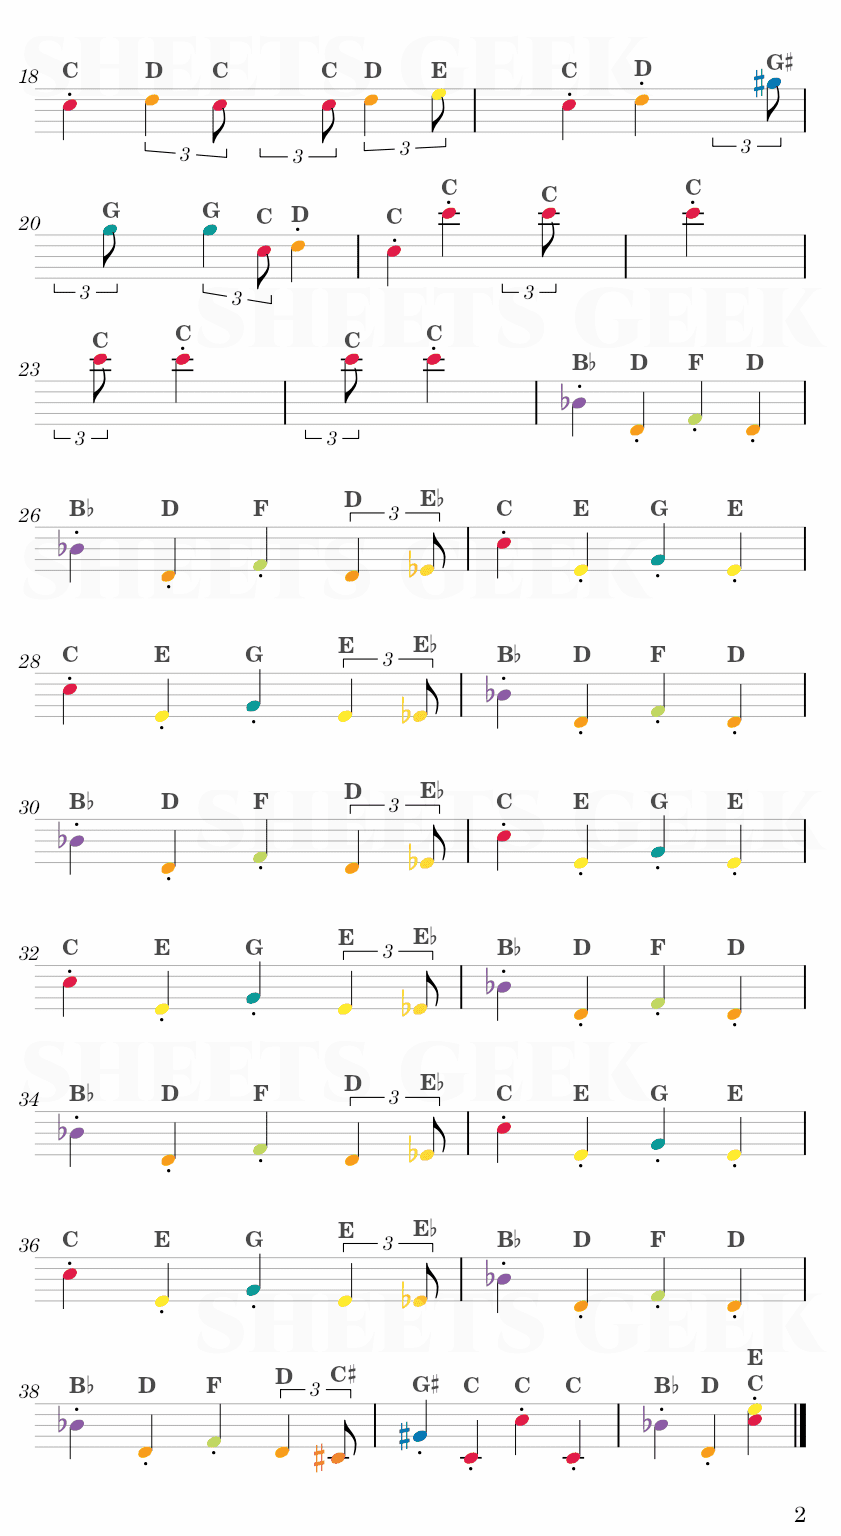 Temmie Village - Undertale Easy Sheet Music Free for piano, keyboard, flute, violin, sax, cello page 2